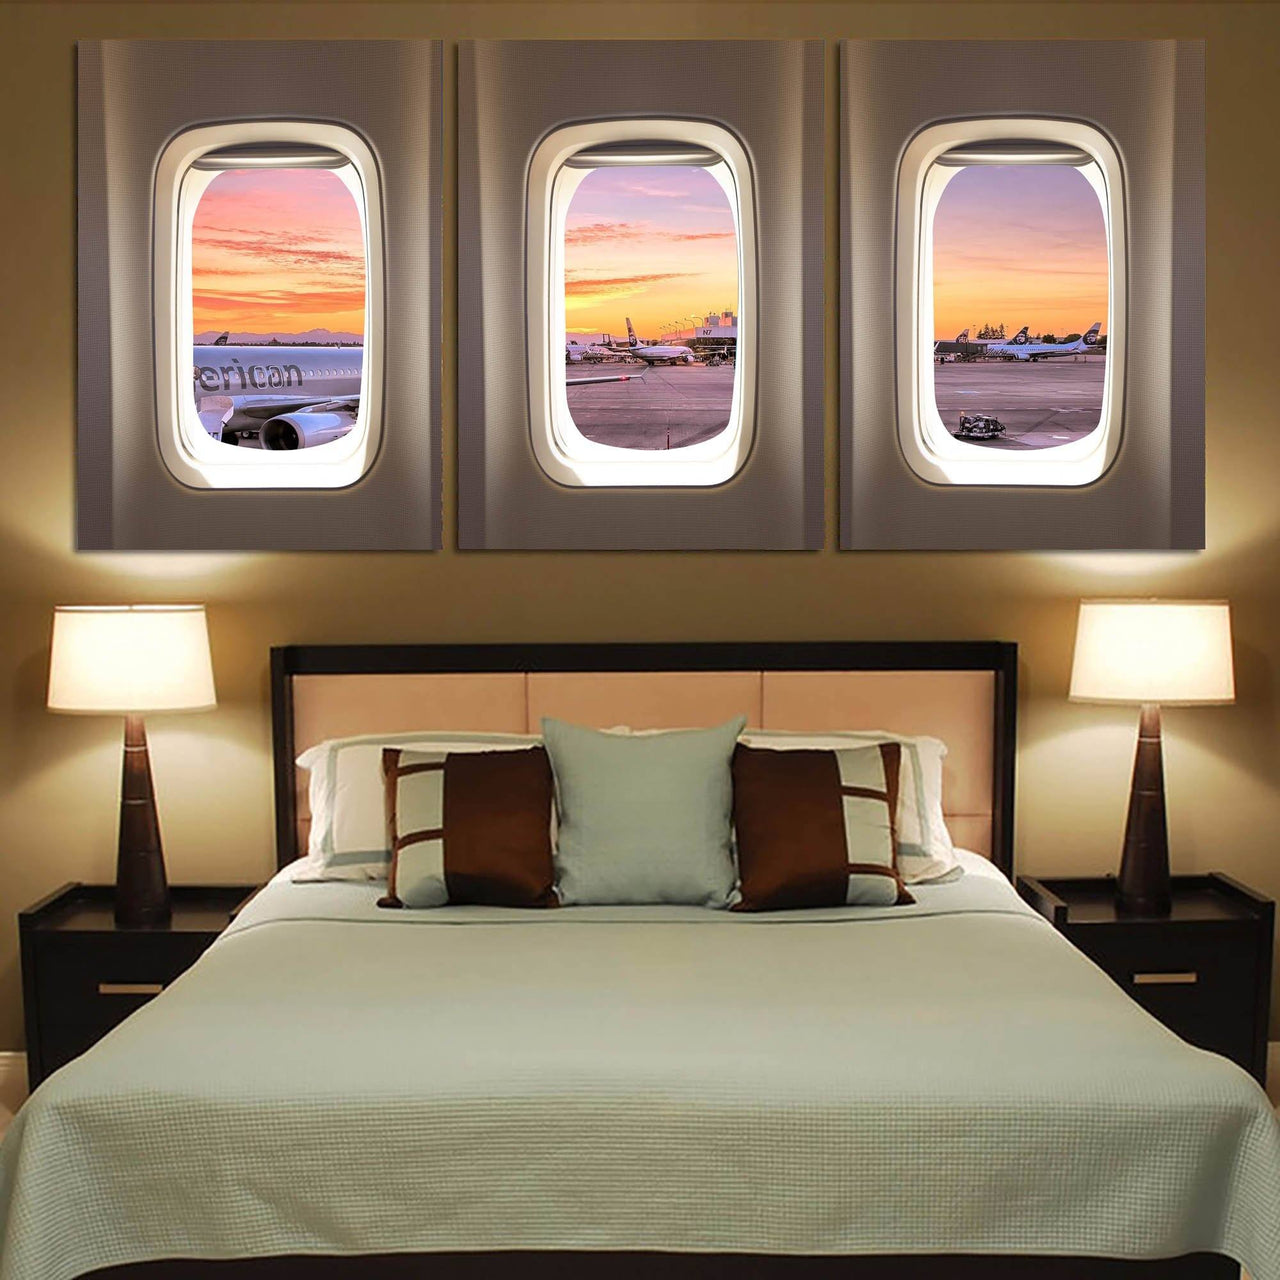 Airport View Through Passanger Windows Printed Canvas Posters (3 Pieces) Aviation Shop 